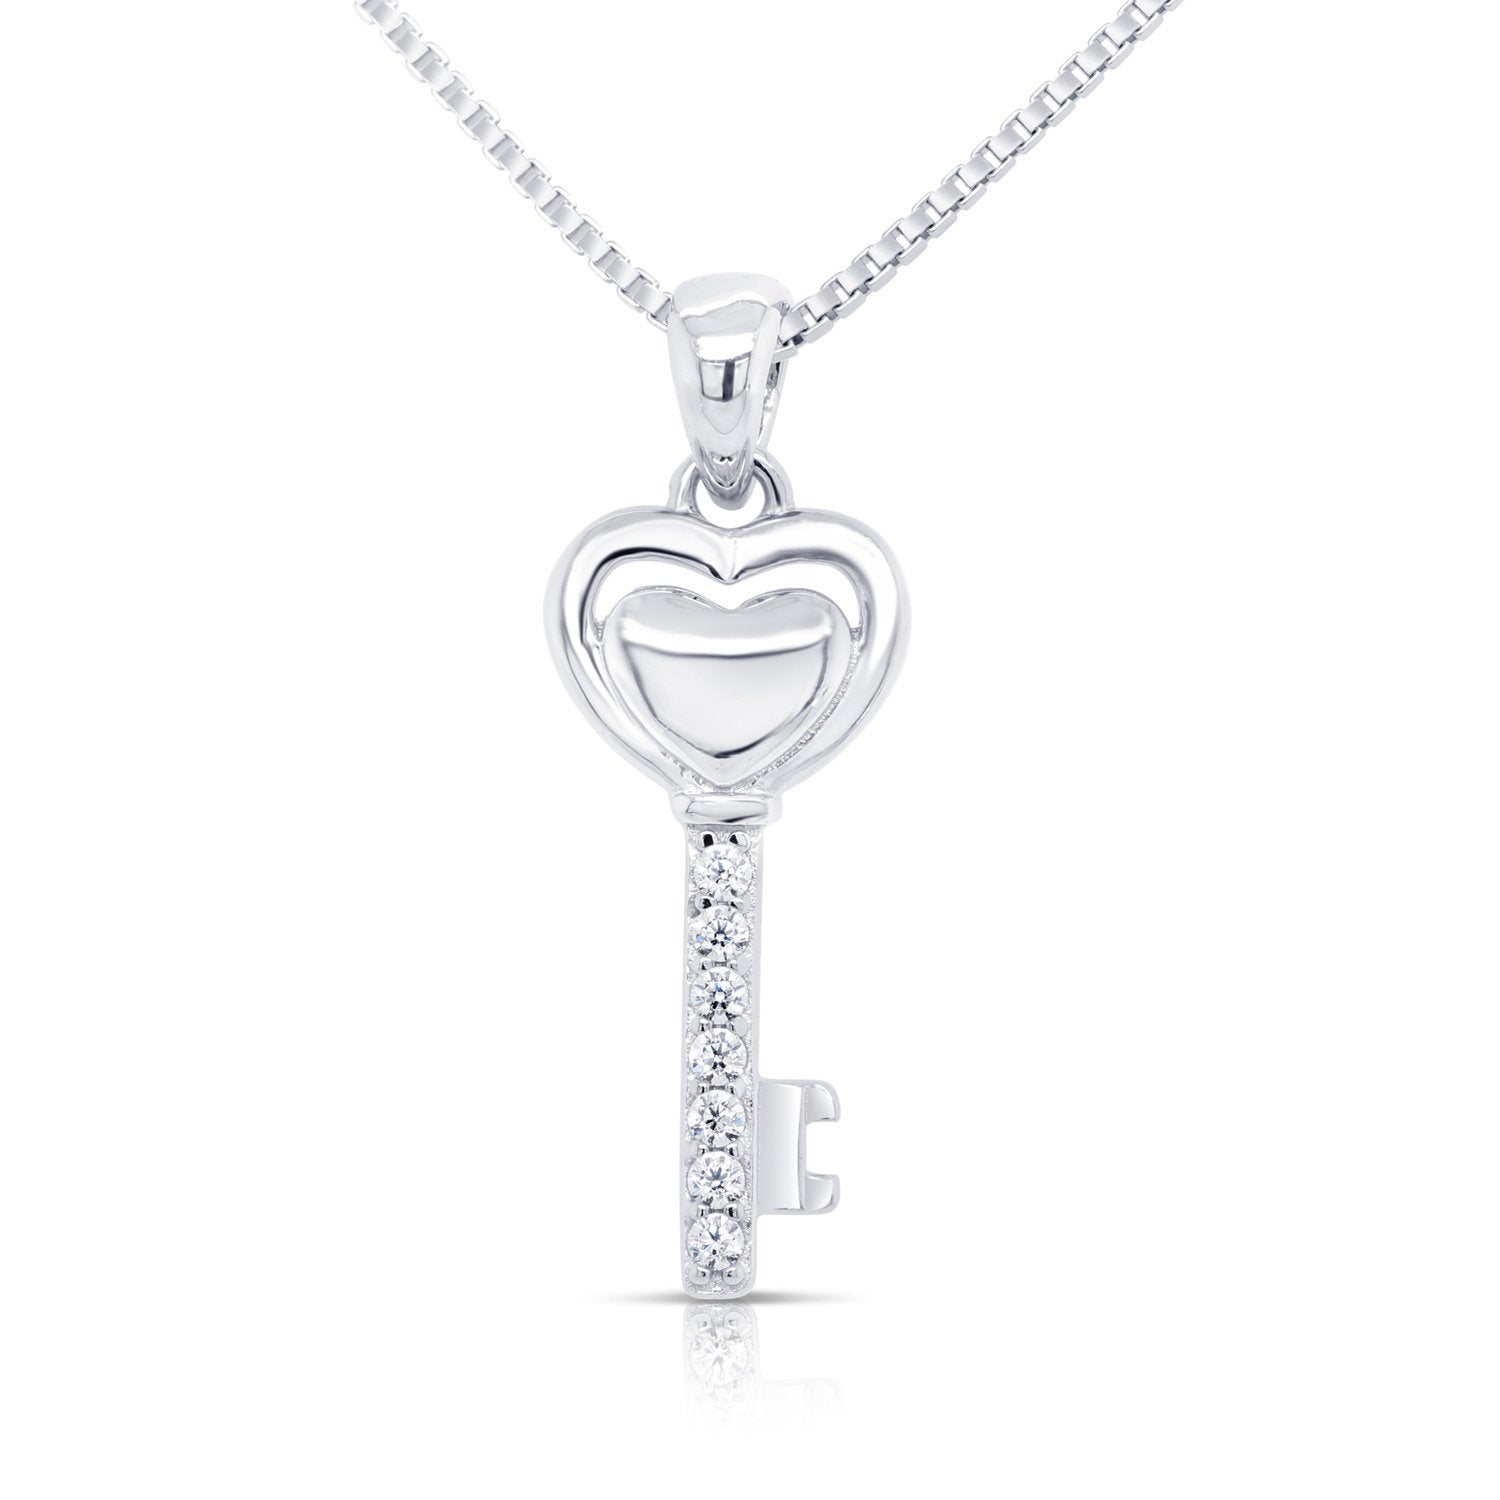 CZ Heart and Key Charm Necklace in Sterling Silver